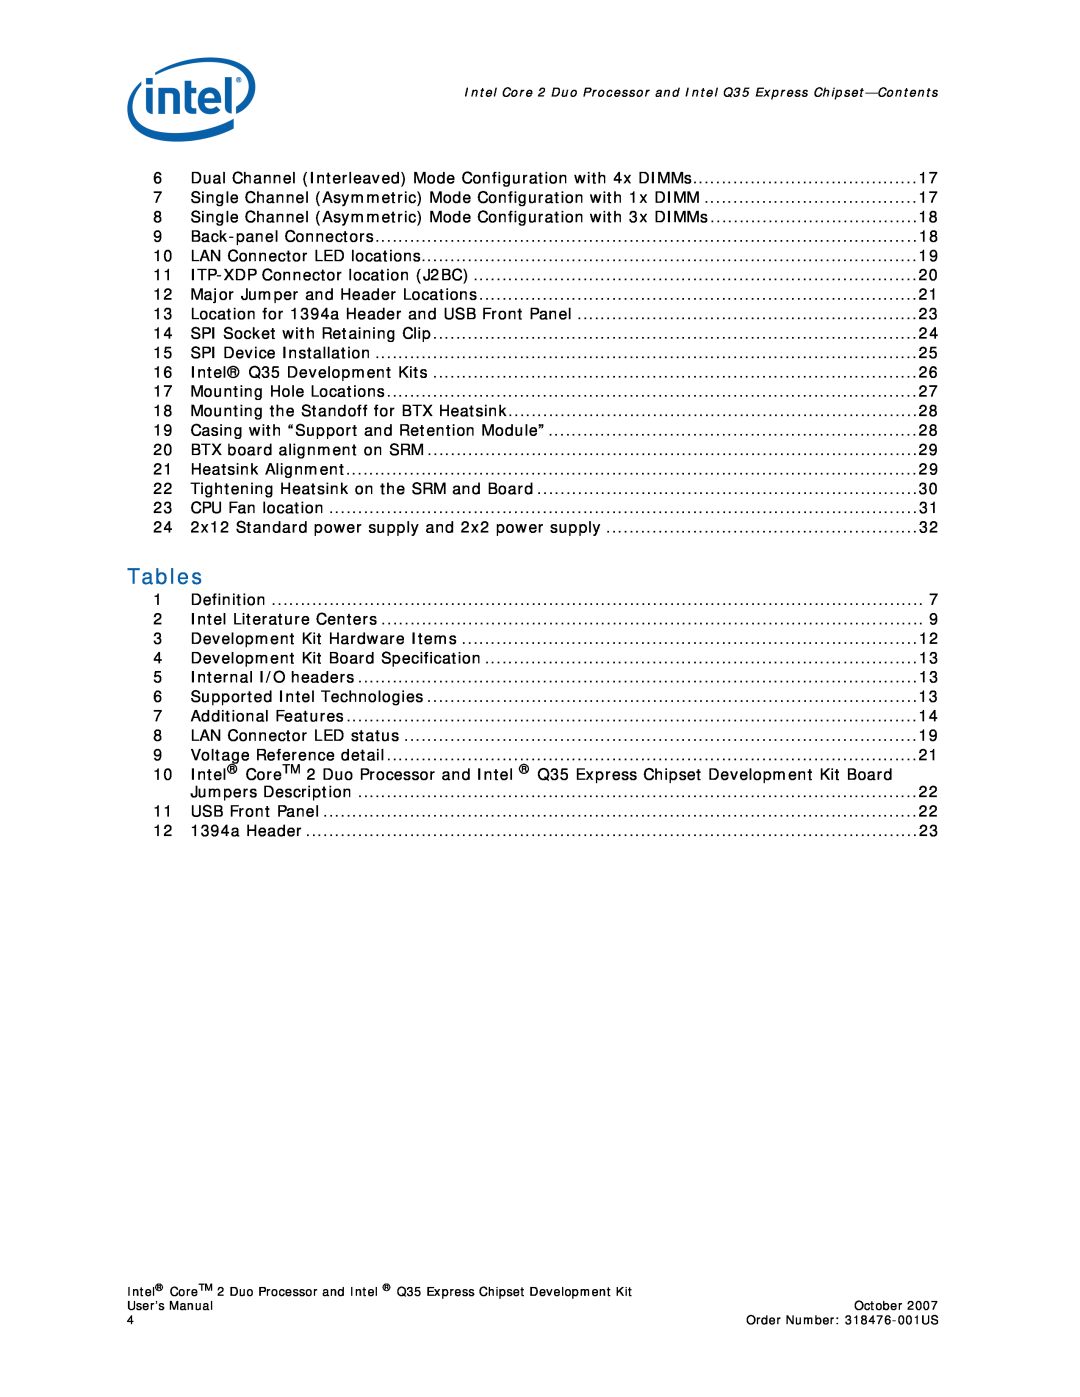 Intel user manual Tables, Intel Core 2 Duo Processor and Intel Q35 Express Chipset-Contents 